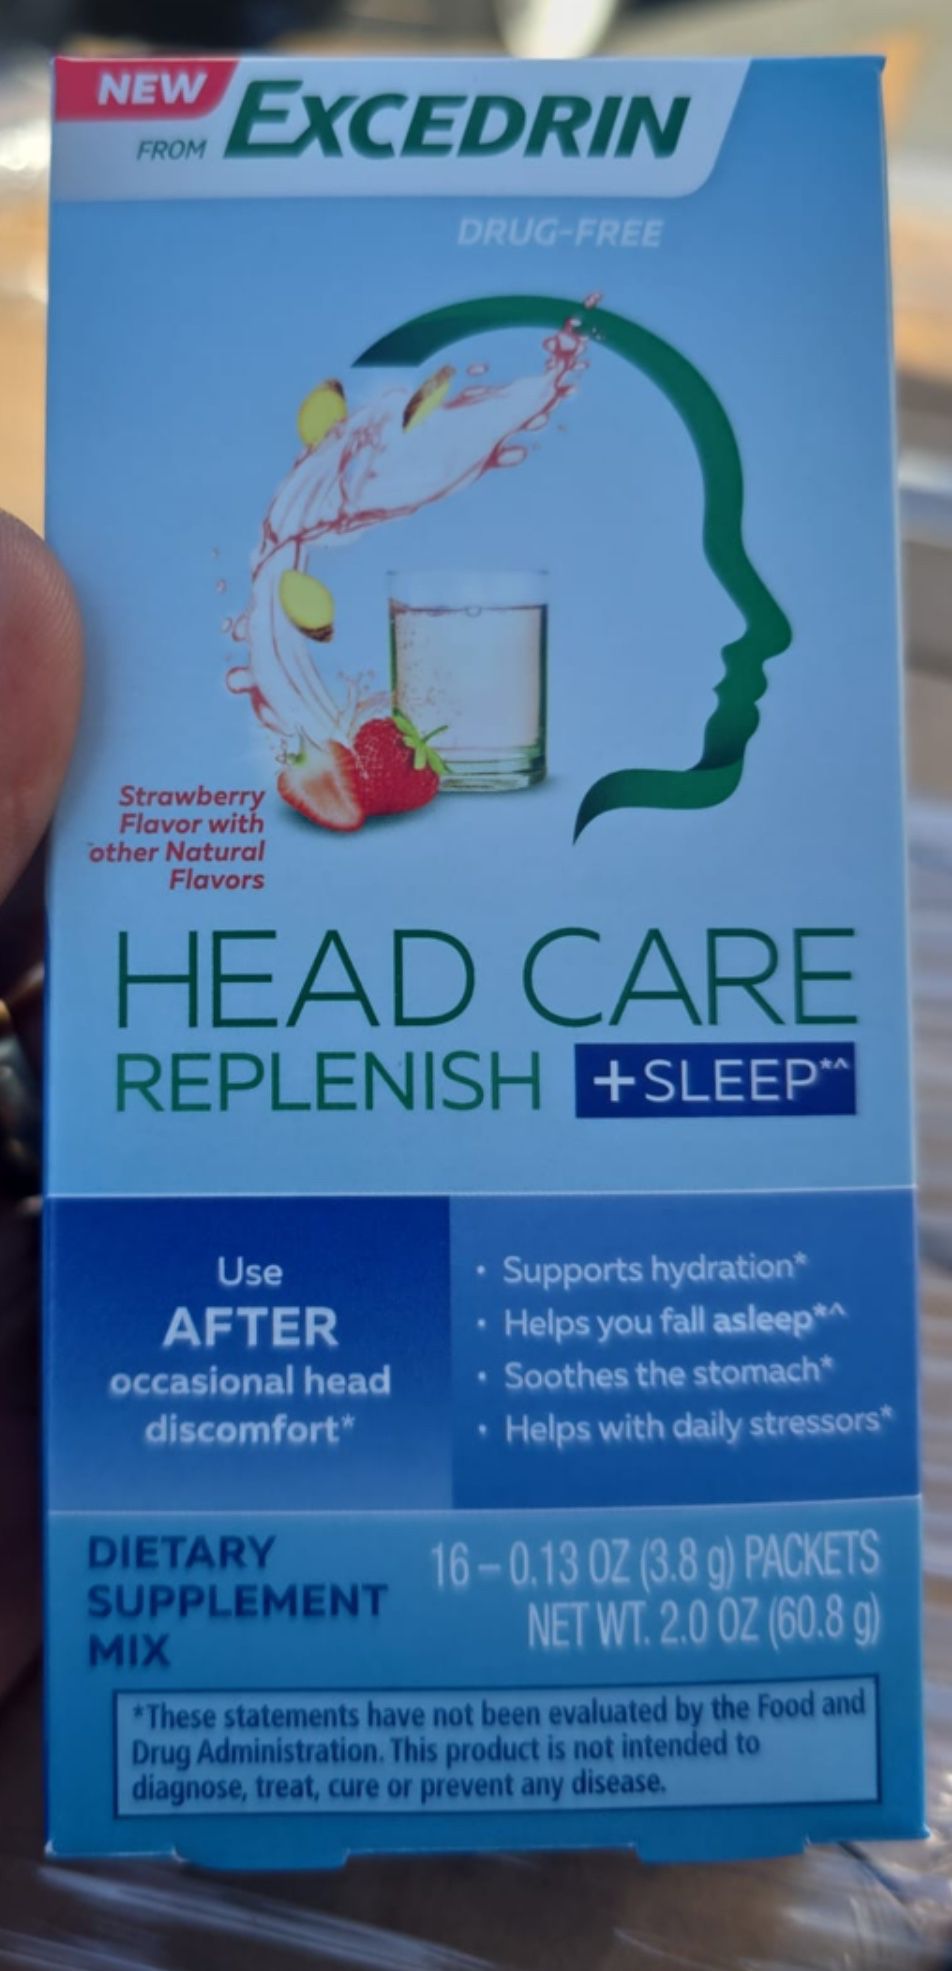 Head Care Replenish + Sleep From Excedrin Dietary Supplement, 16 CT 12 Packs 